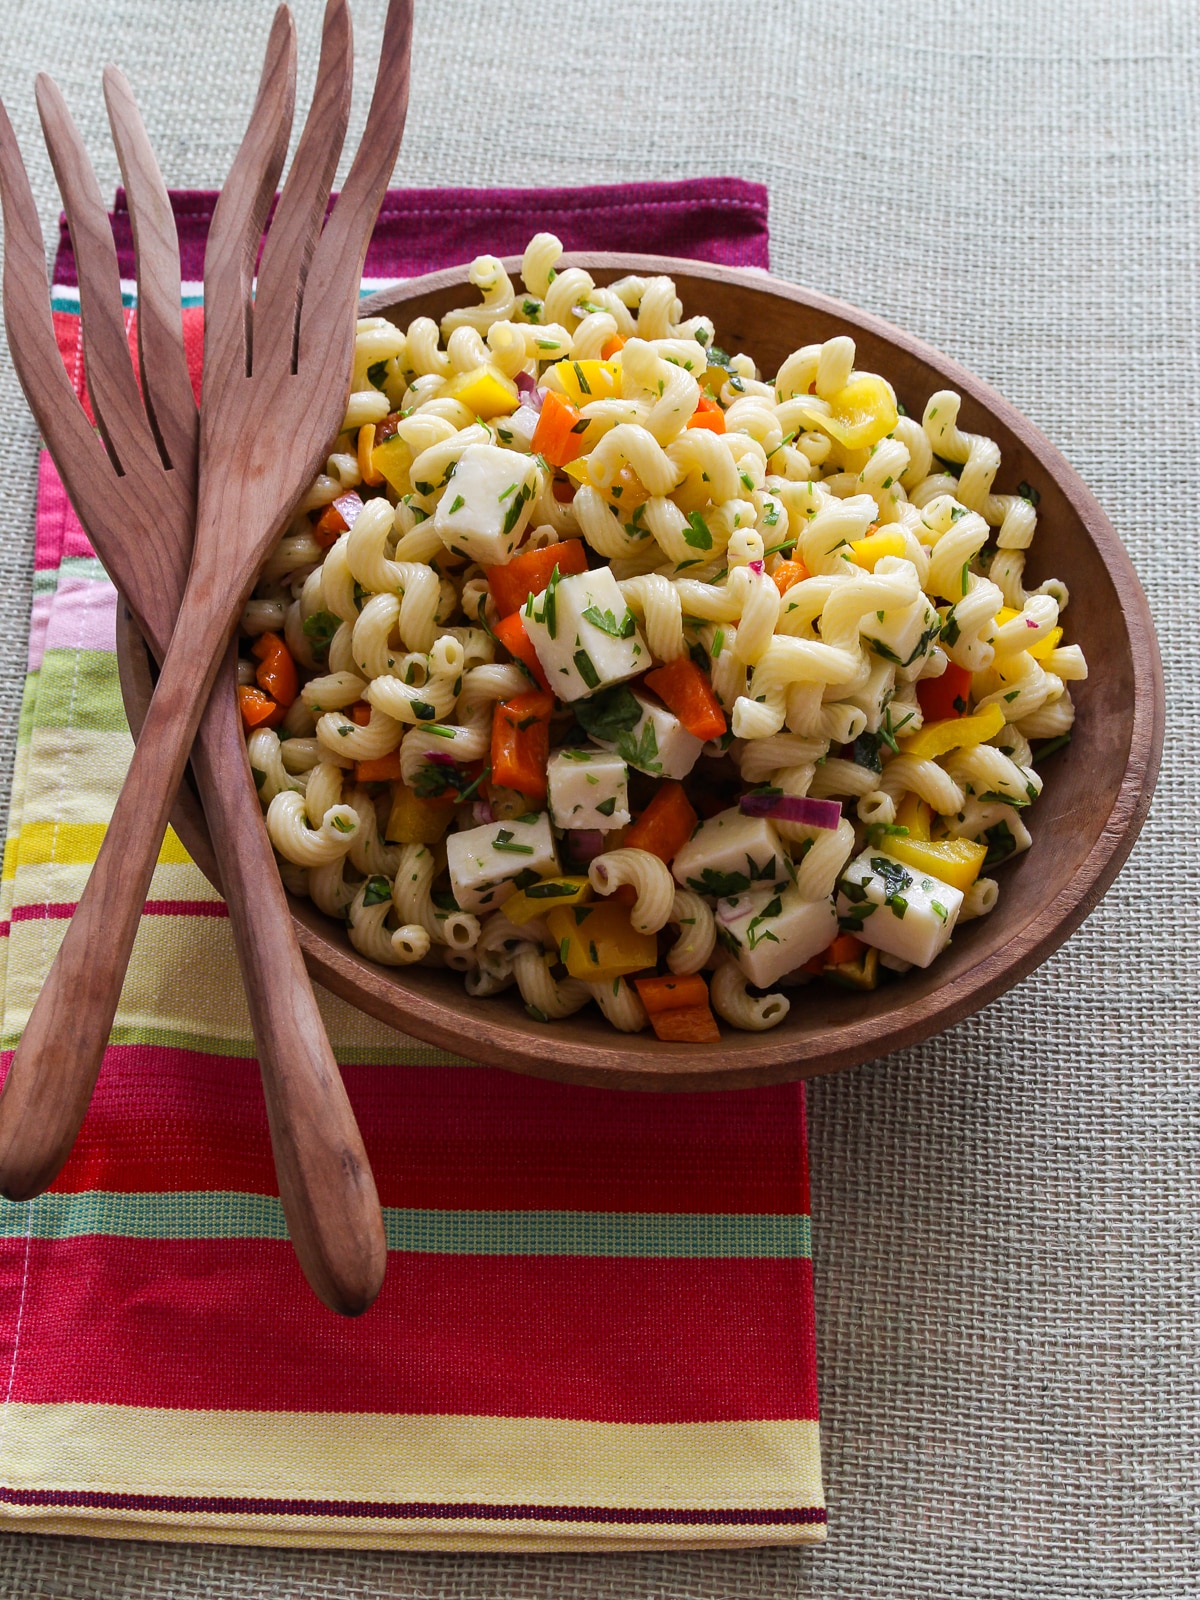 A wood bowl and tongs with pasta salad recipe inside on a colorful striped towel. 